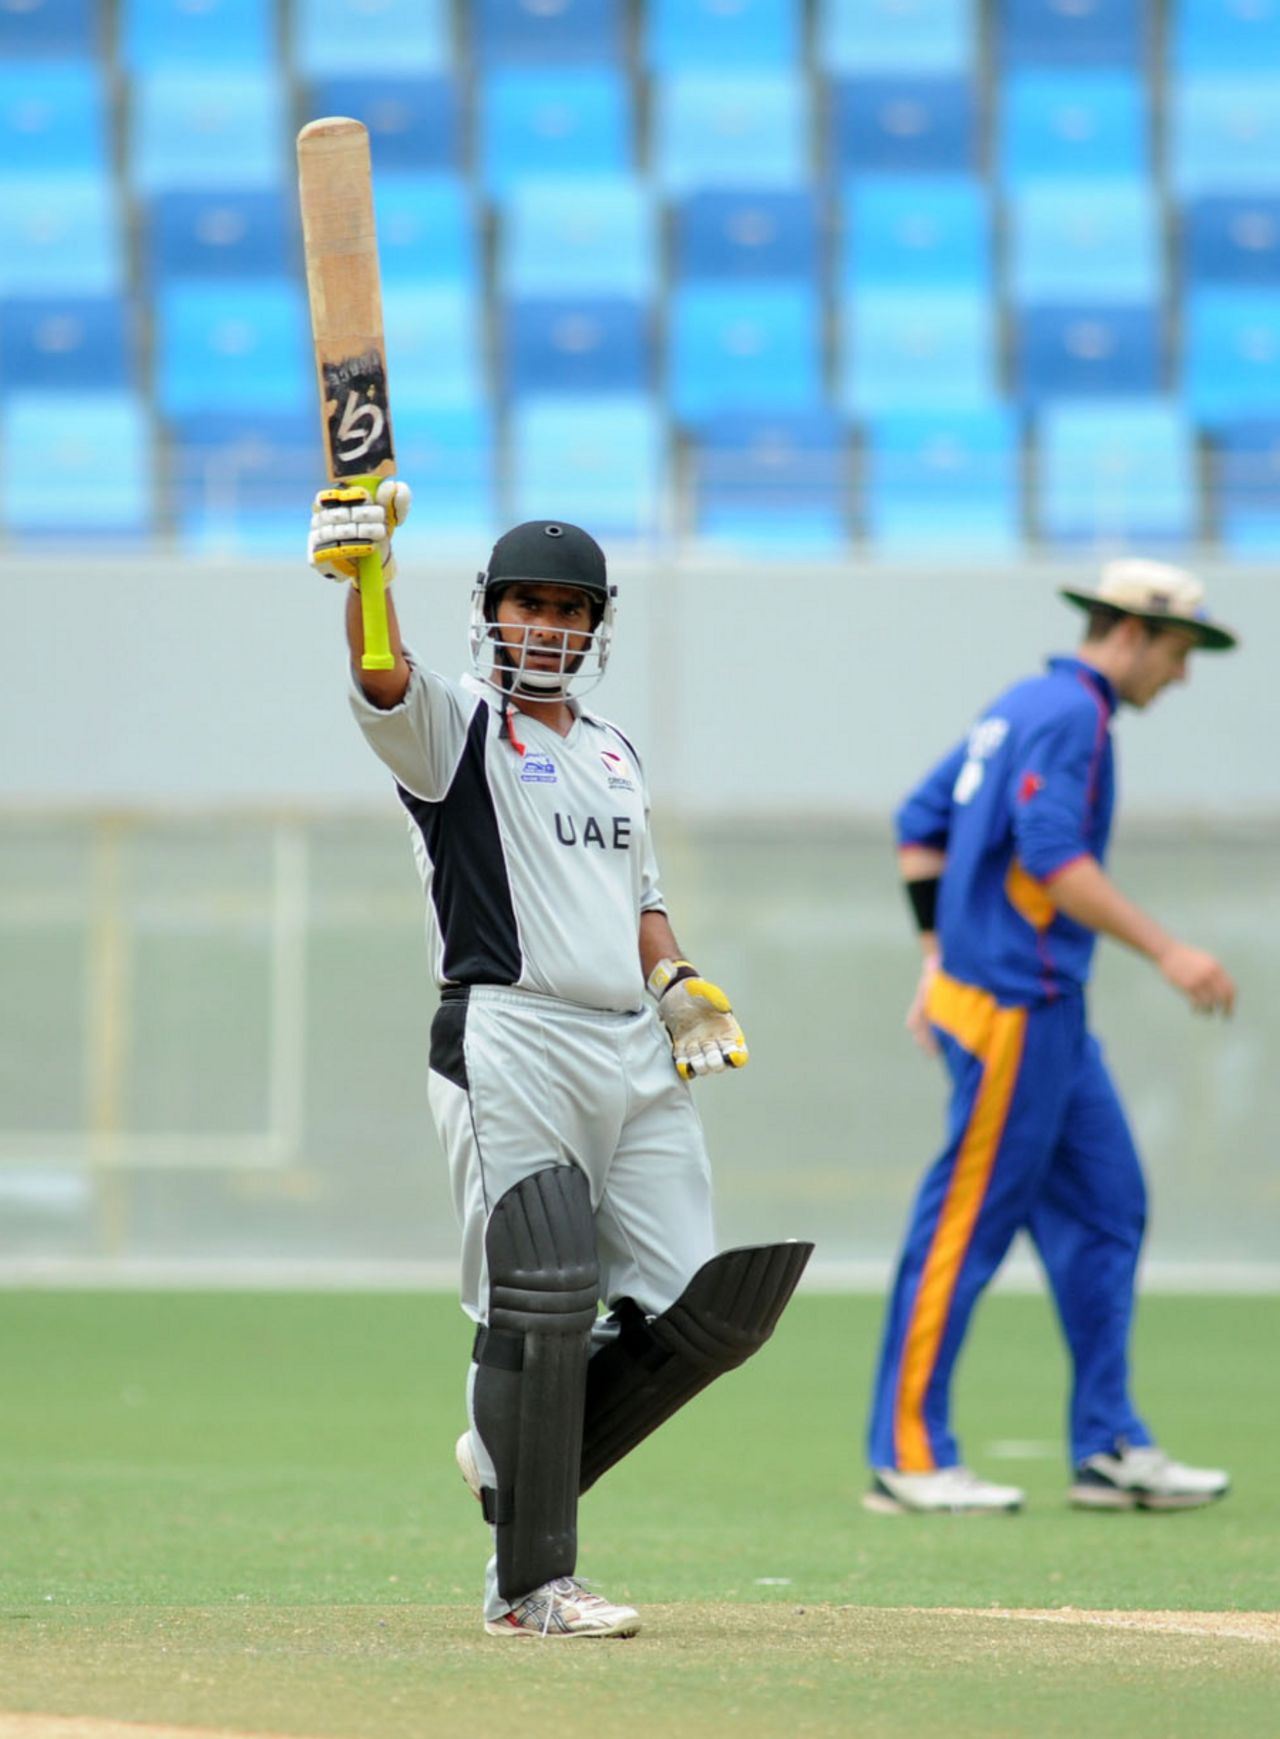 Saqib Ali's fifty helped UAE to a five-wicket win over Namibia in the Division Two final, United Arab Emirates v Namibia, WCL Division 2, Dubai. April 15, 2011